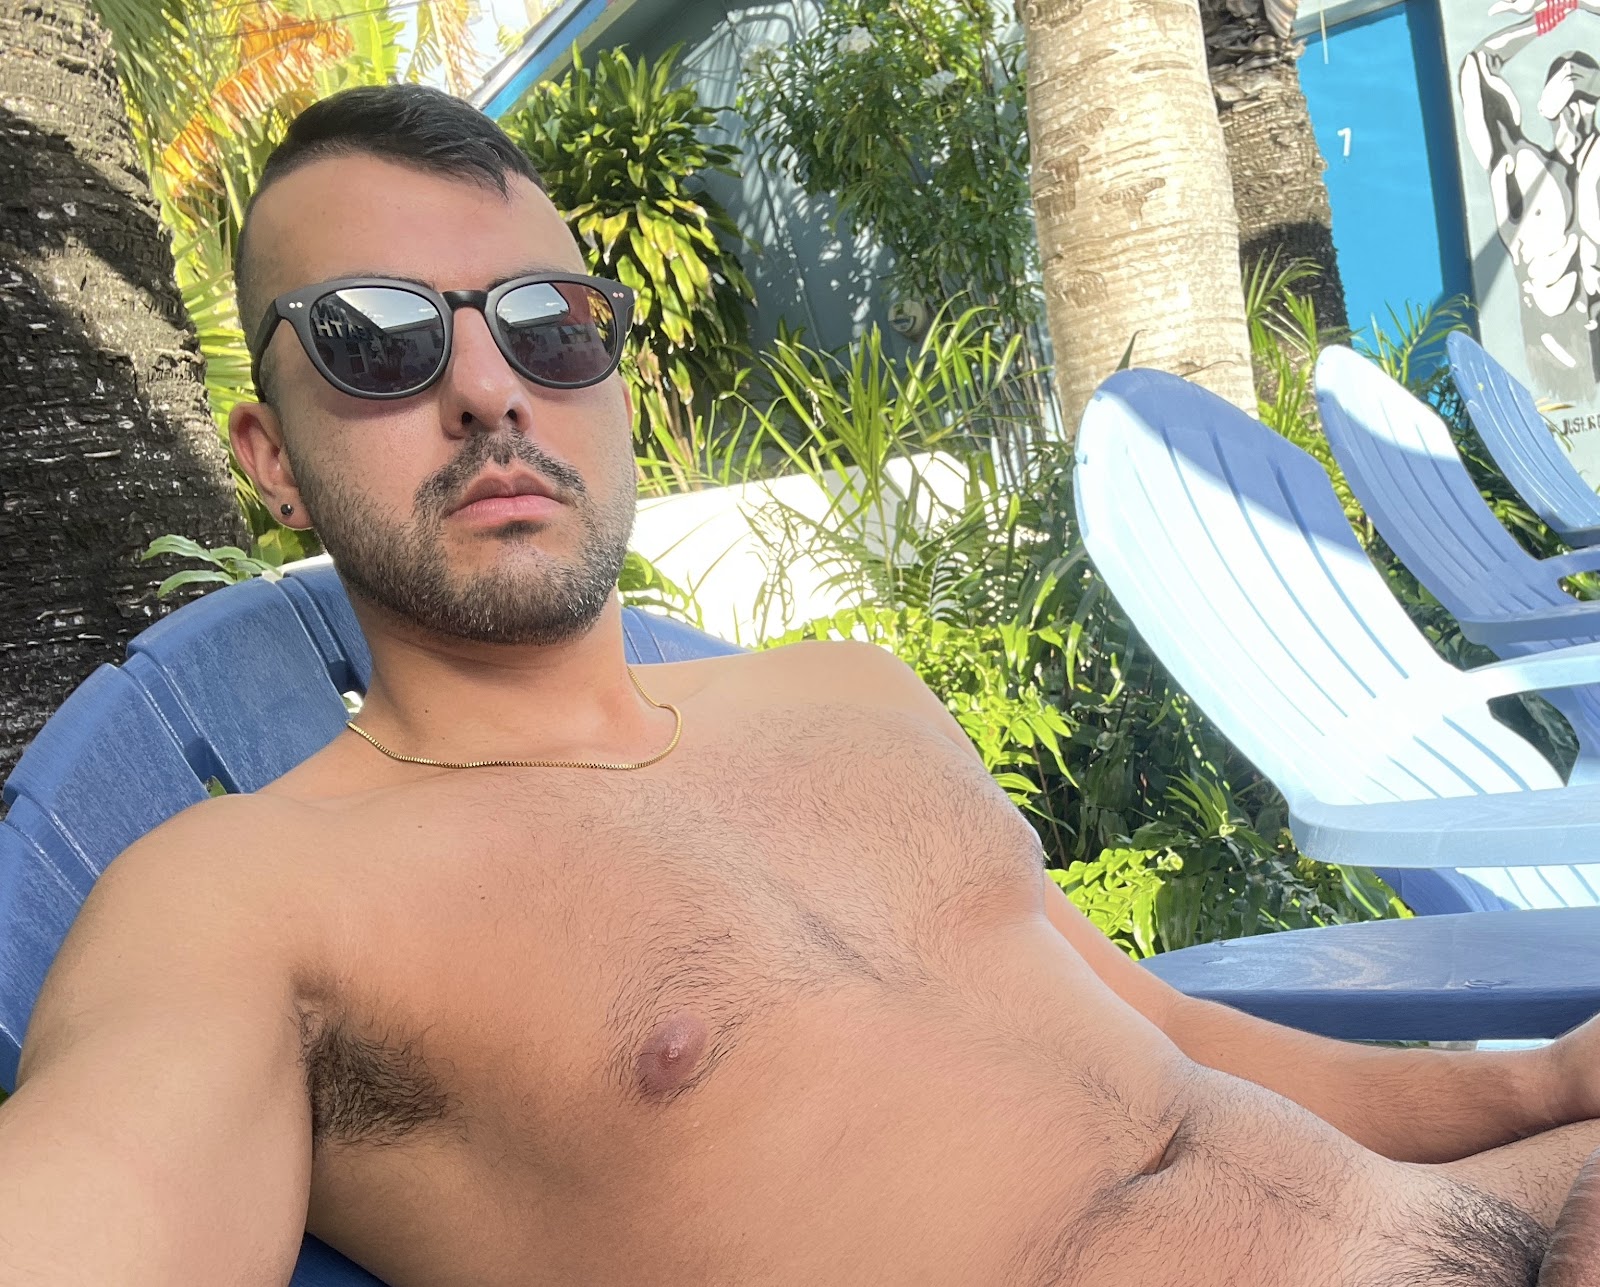 phil naked sunbathing at Inn Leather in gay fort lauderdale